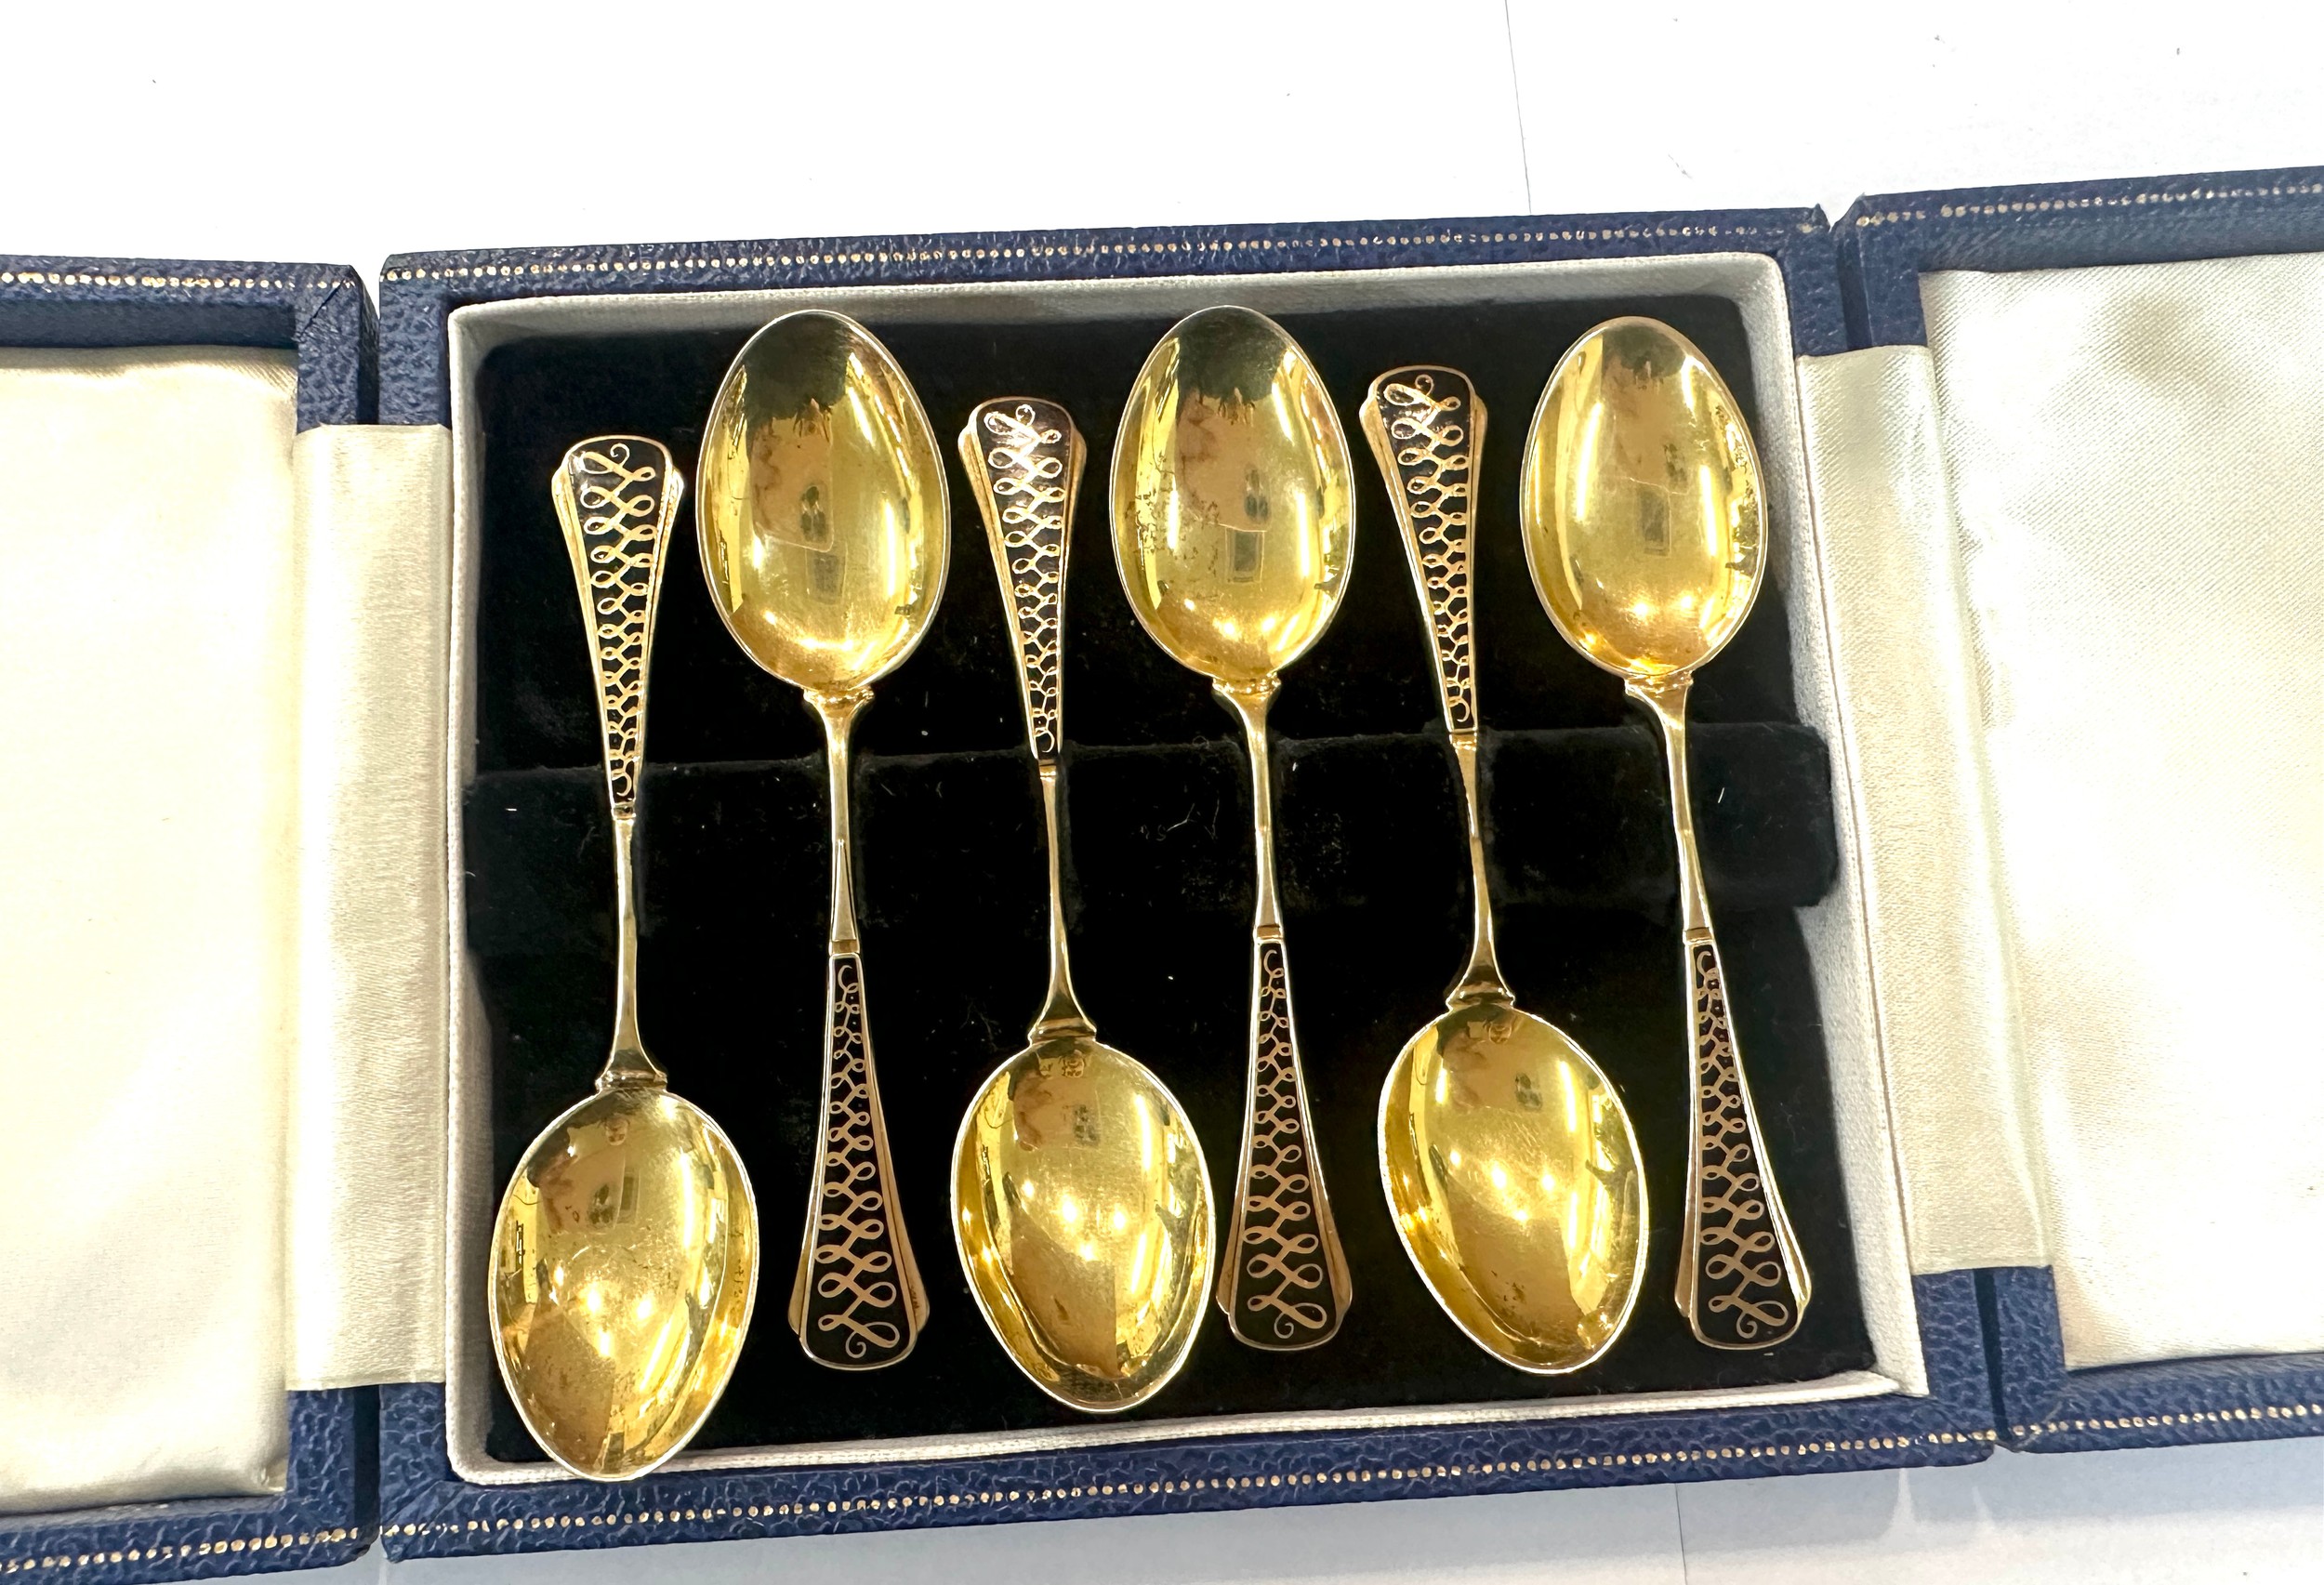 Cased set of 6 silver and enamel tea spoons, Birmingham silver hallmarks, total weight 50 grams - Image 3 of 3